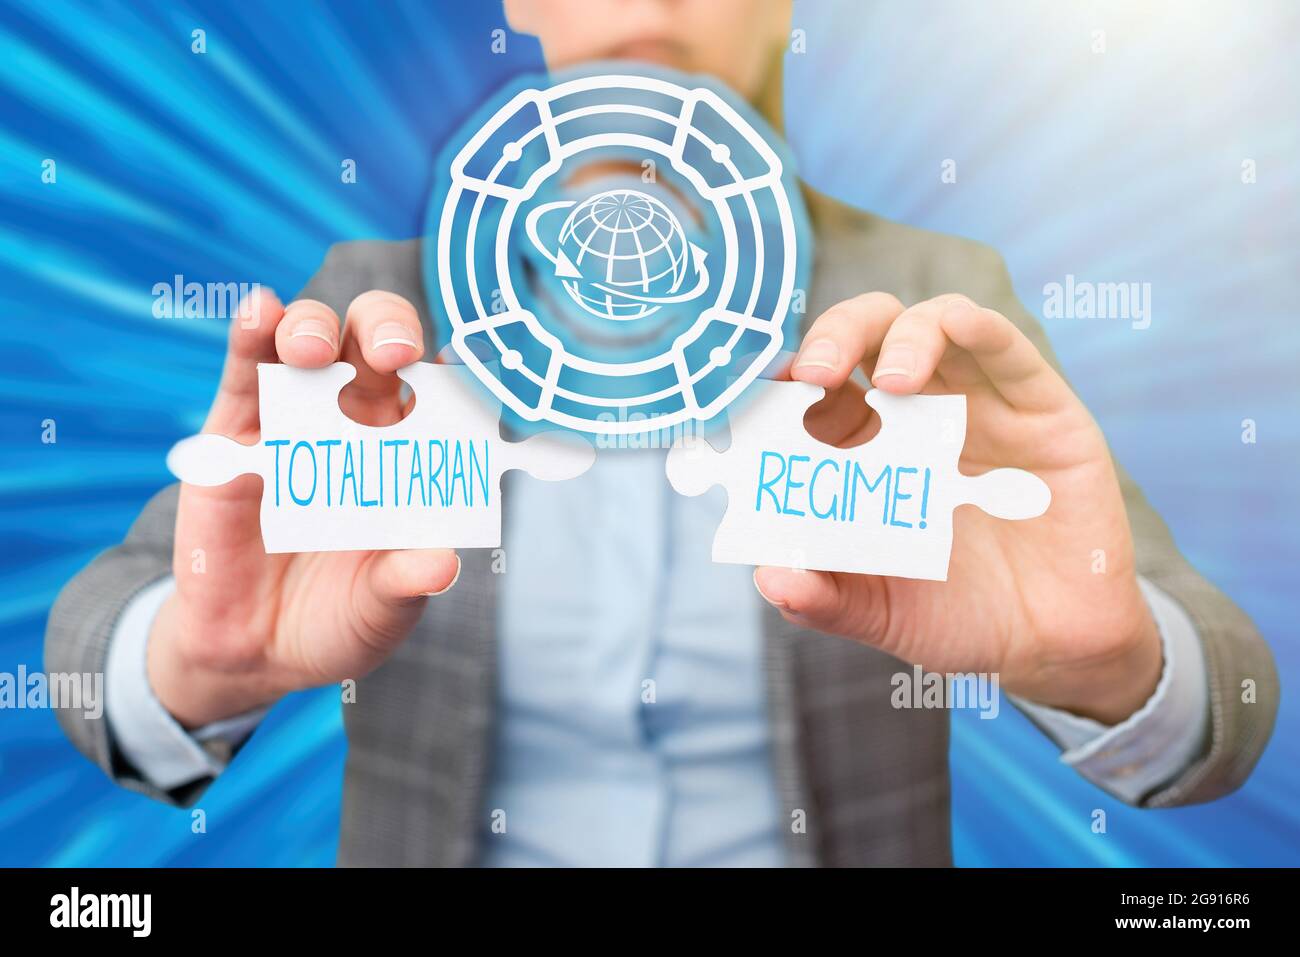 Text sign showing Totalitarian Regime, Concept meaning mode of government that prohibits opposition parties Business Woman Holding Jigsaw Puzzle Piece Stock Photo